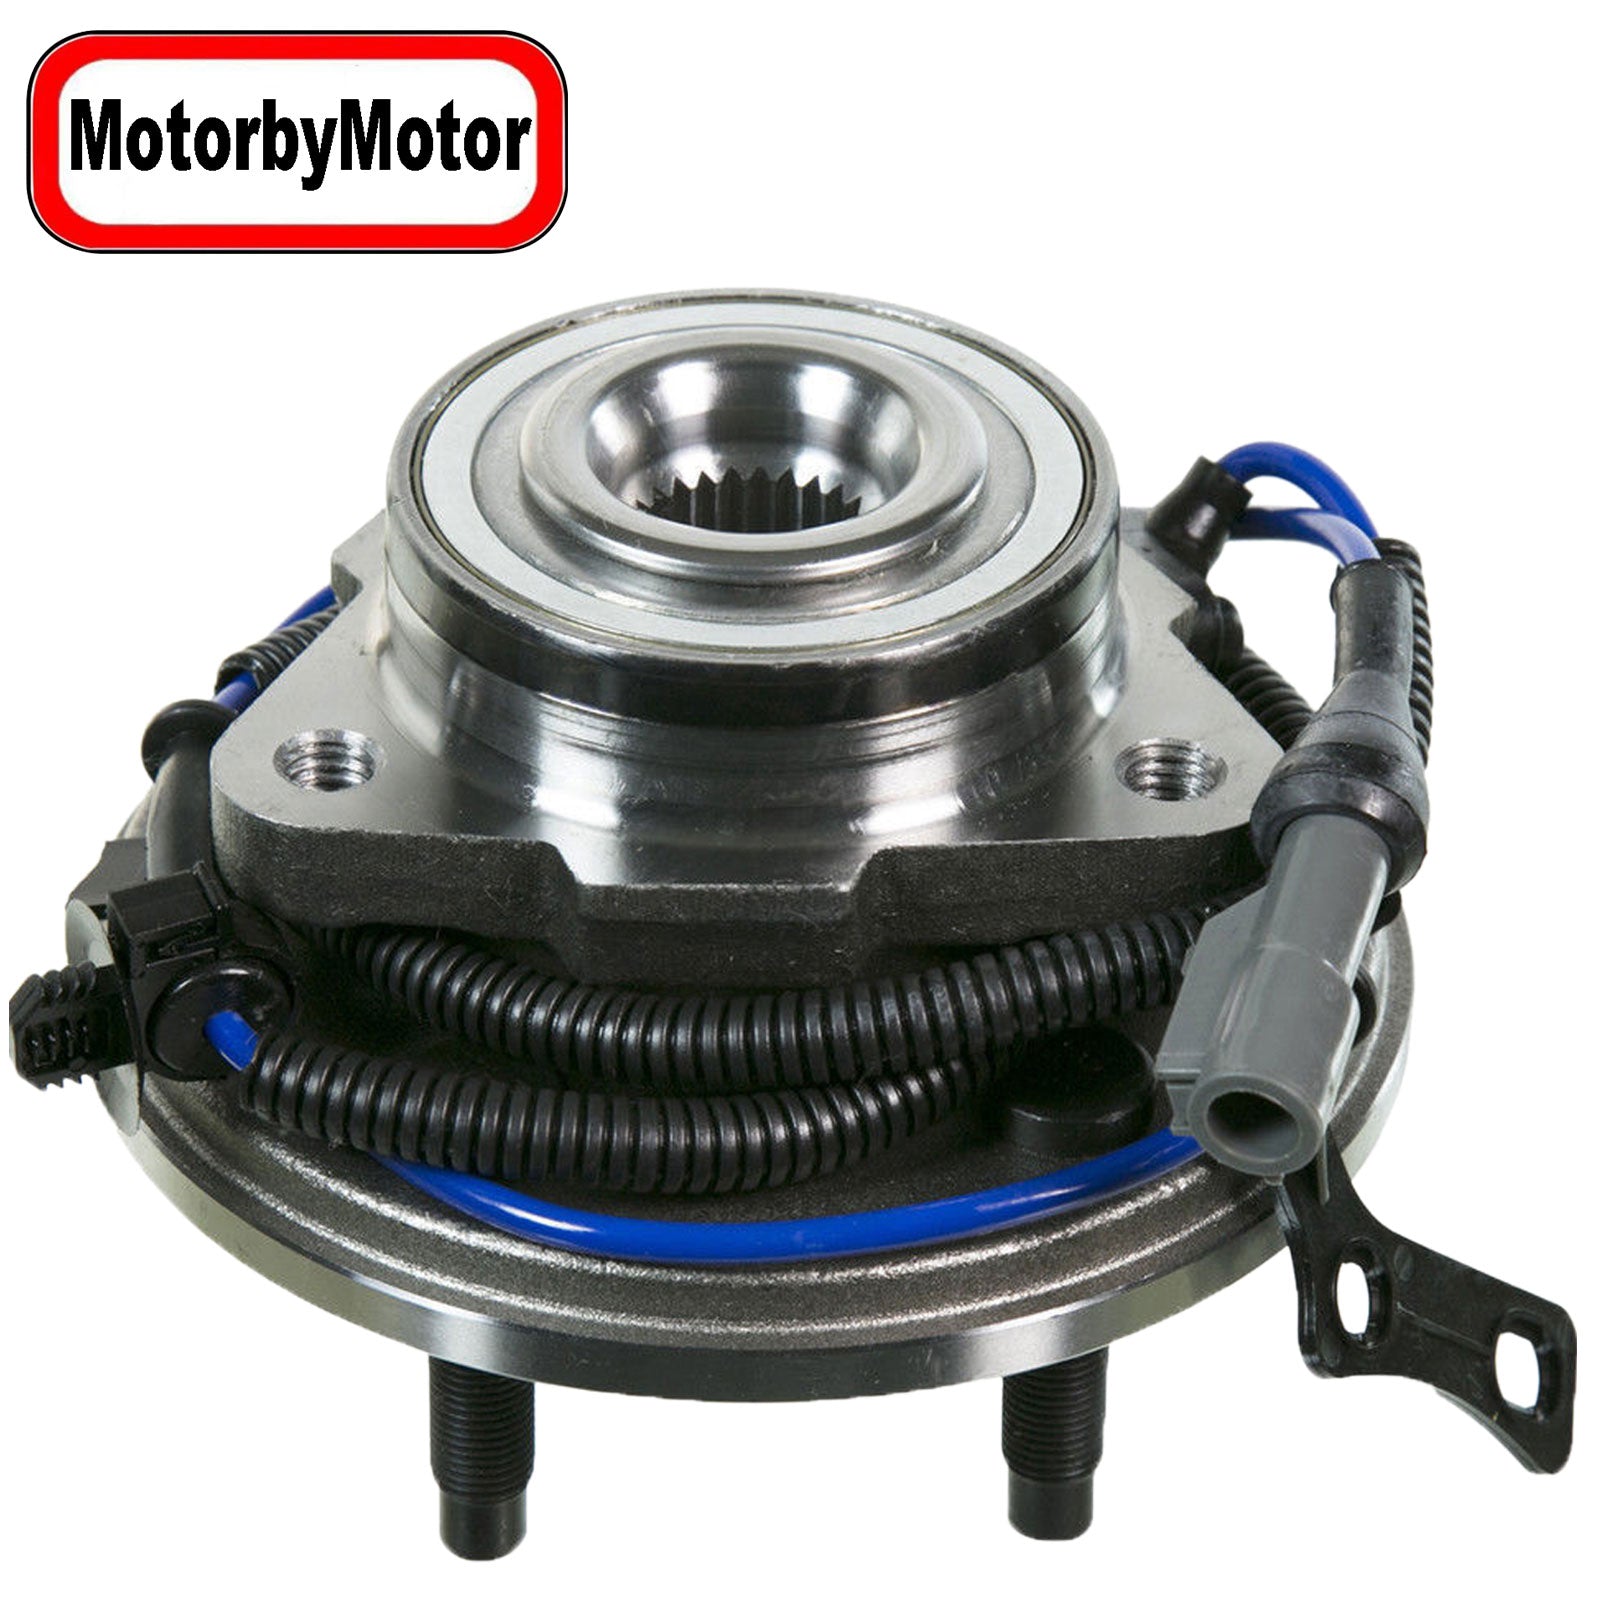 MotorbyMotor 515078 Front Wheel Bearing and Hub Assbmely with 5 Lugs w/ABS Fits for 06-10 Ford Explorer, 07-10 Ford Explorer Sport Trac, 06-10 Mercury Mountaineer Hub Bearing (All Models) MotorbyMotor